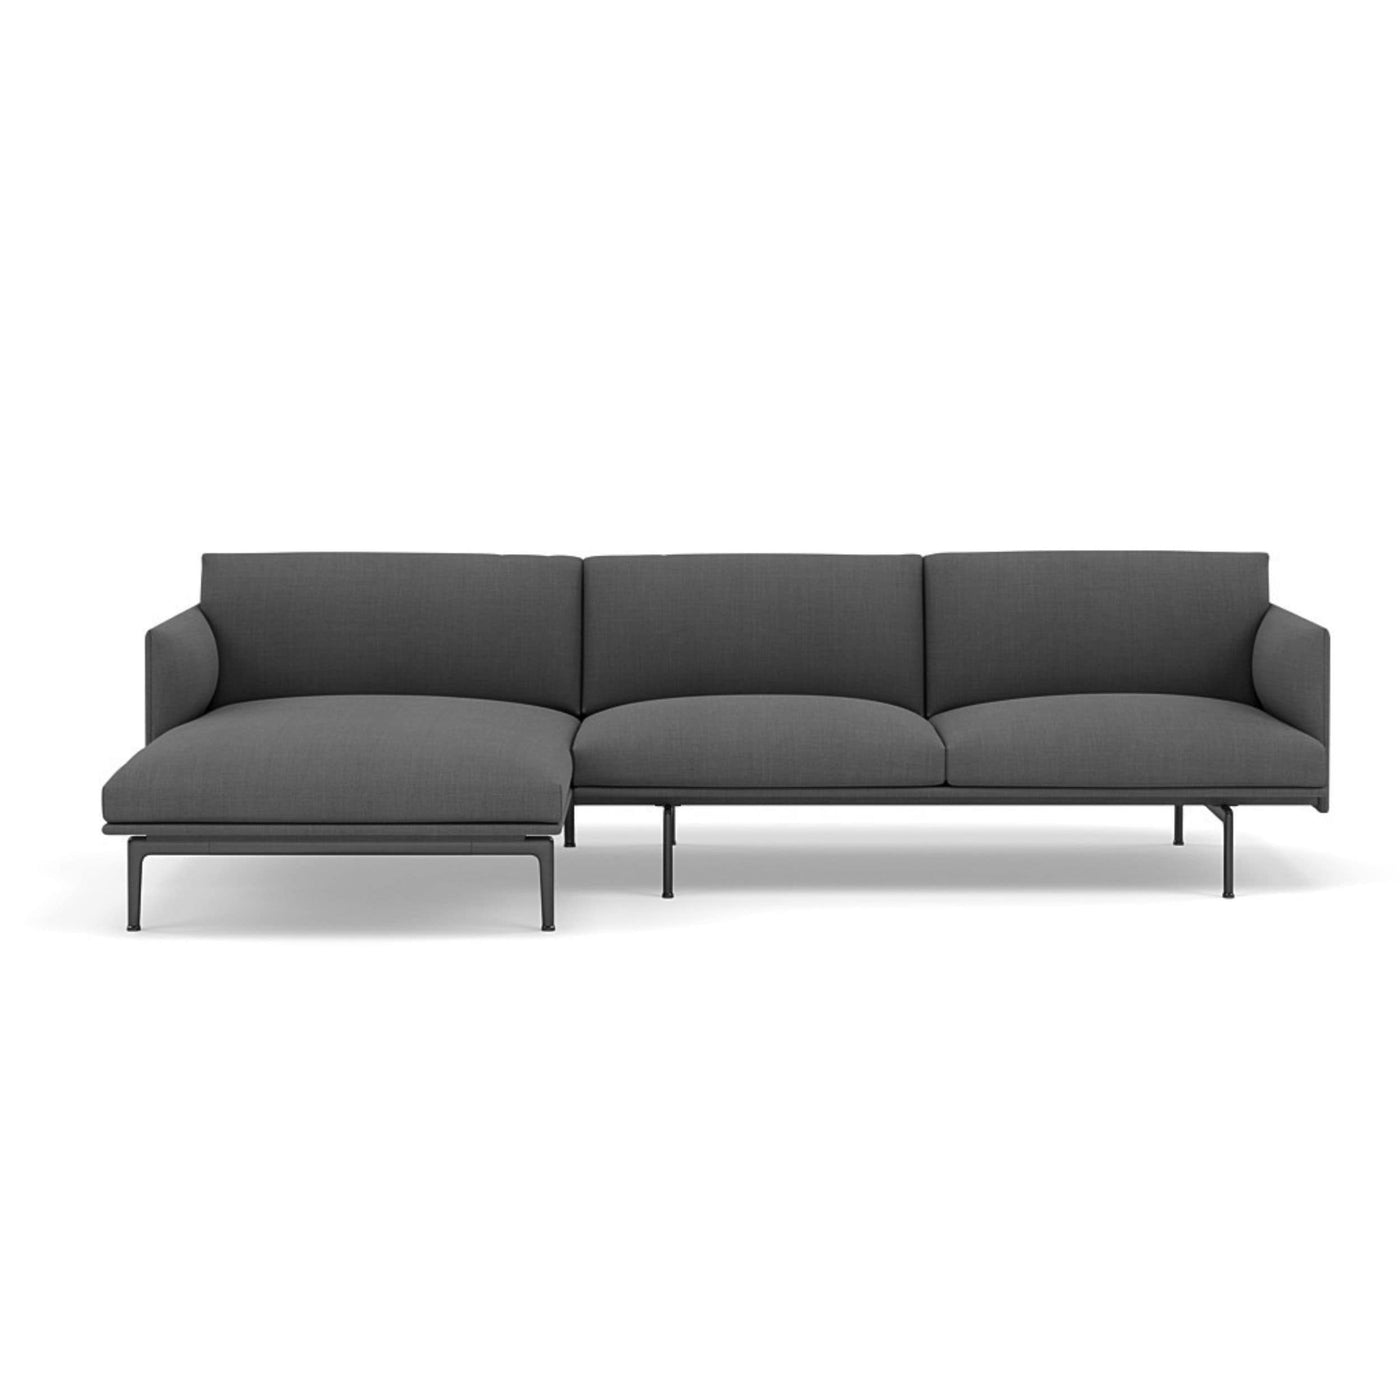 Muuto Outline Chaise Longue sofa in remix 163. Made to order from someday designs.Muuto Outline Chaise Longue sofa in remix 163. Made to order from someday designs. #colour_remix-163